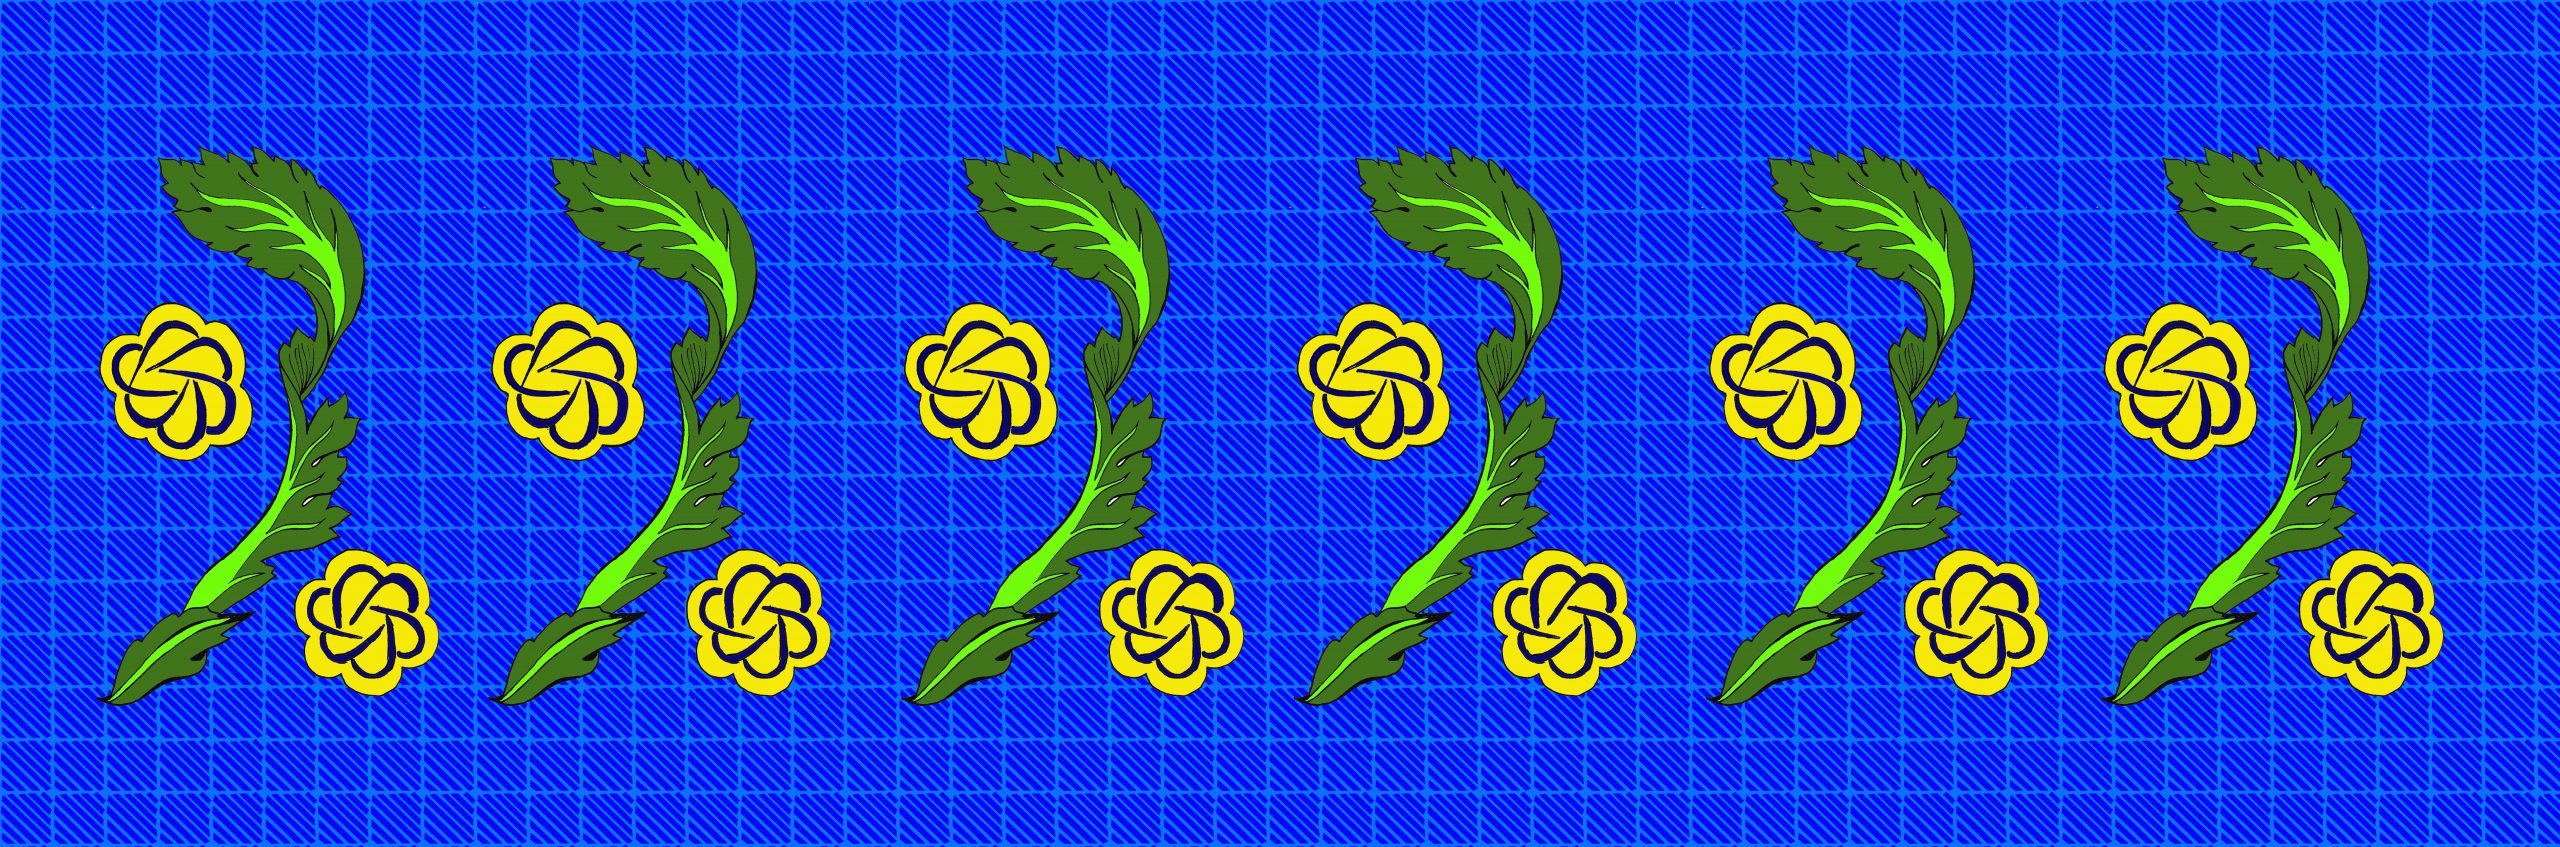 Yellow flowers and green leaves against squared blue background